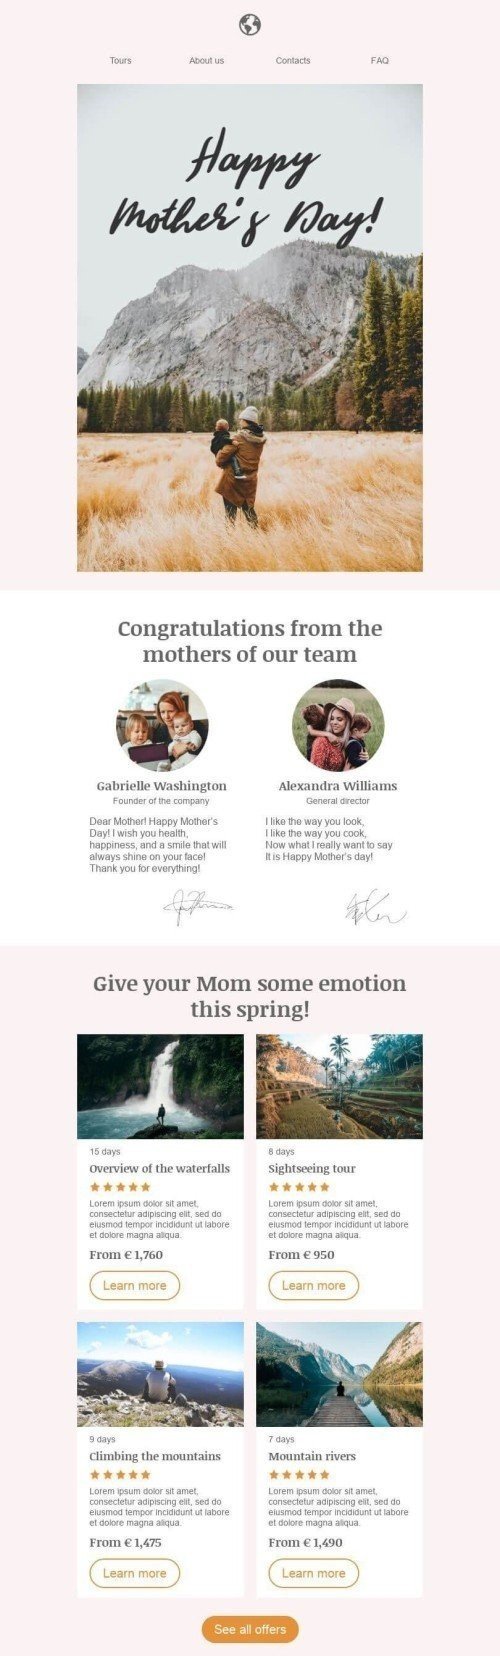 Mother’s Day Email Template «Congratulations from the mothers» for Travel industry desktop view